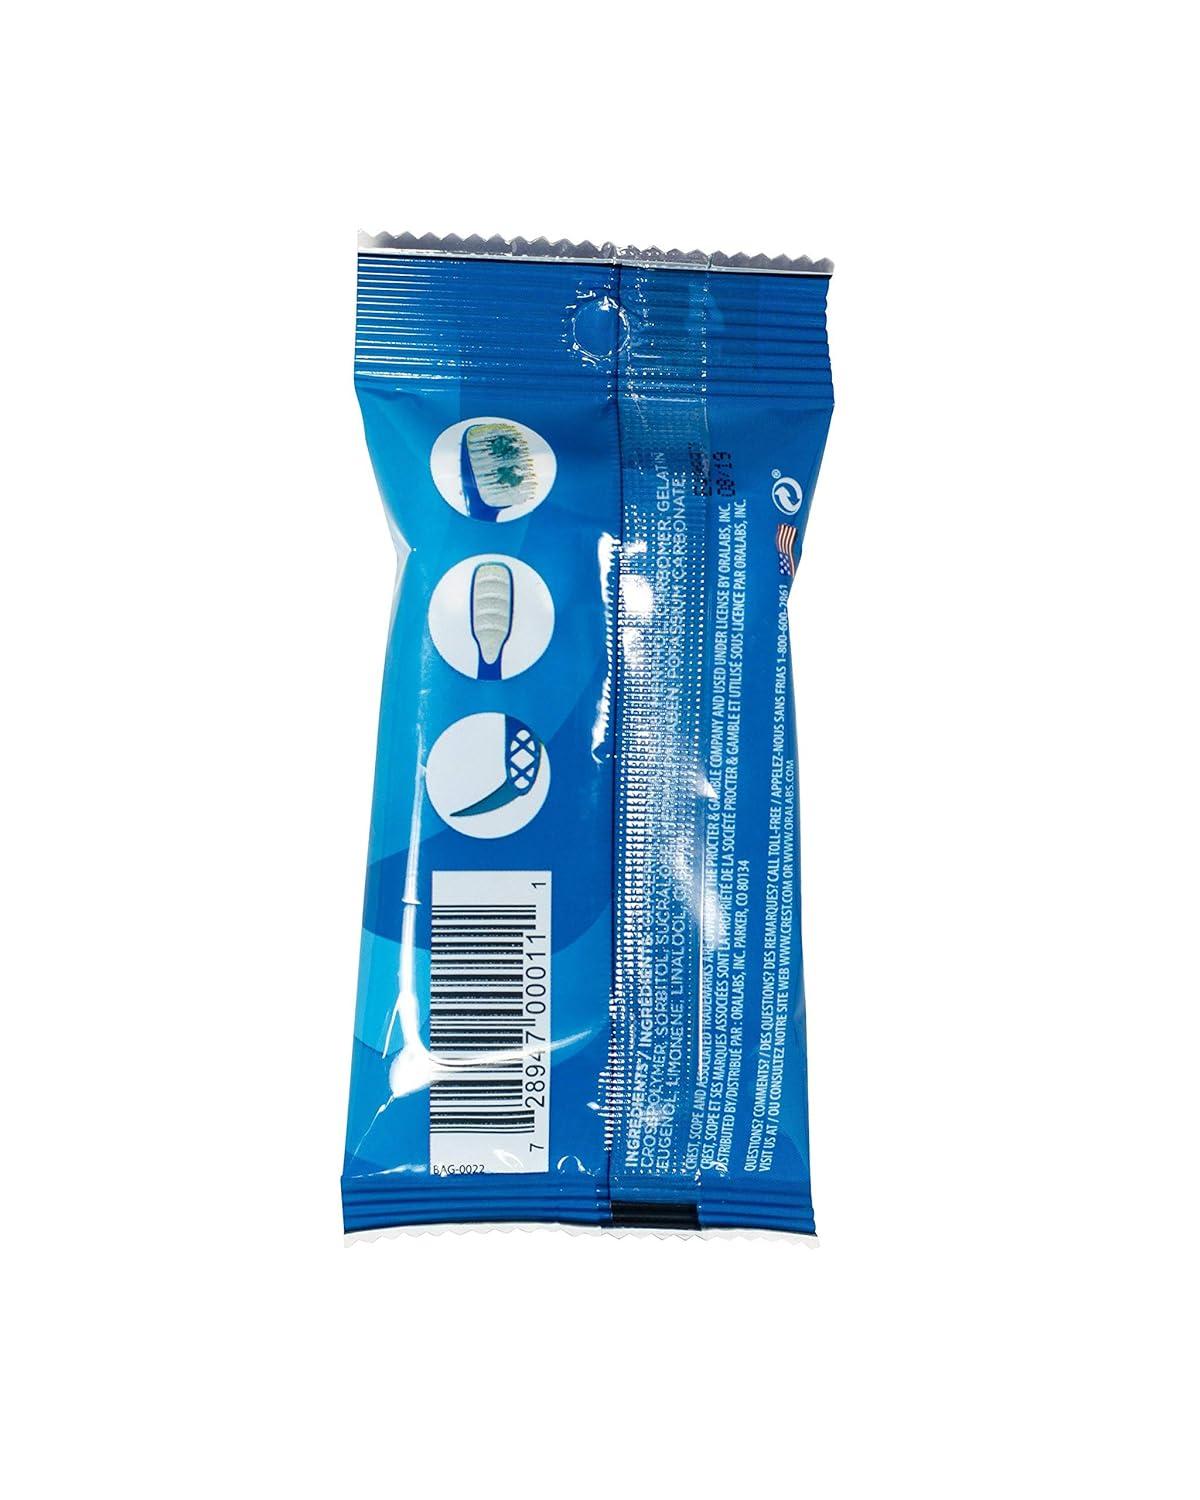 crest toothbrushes